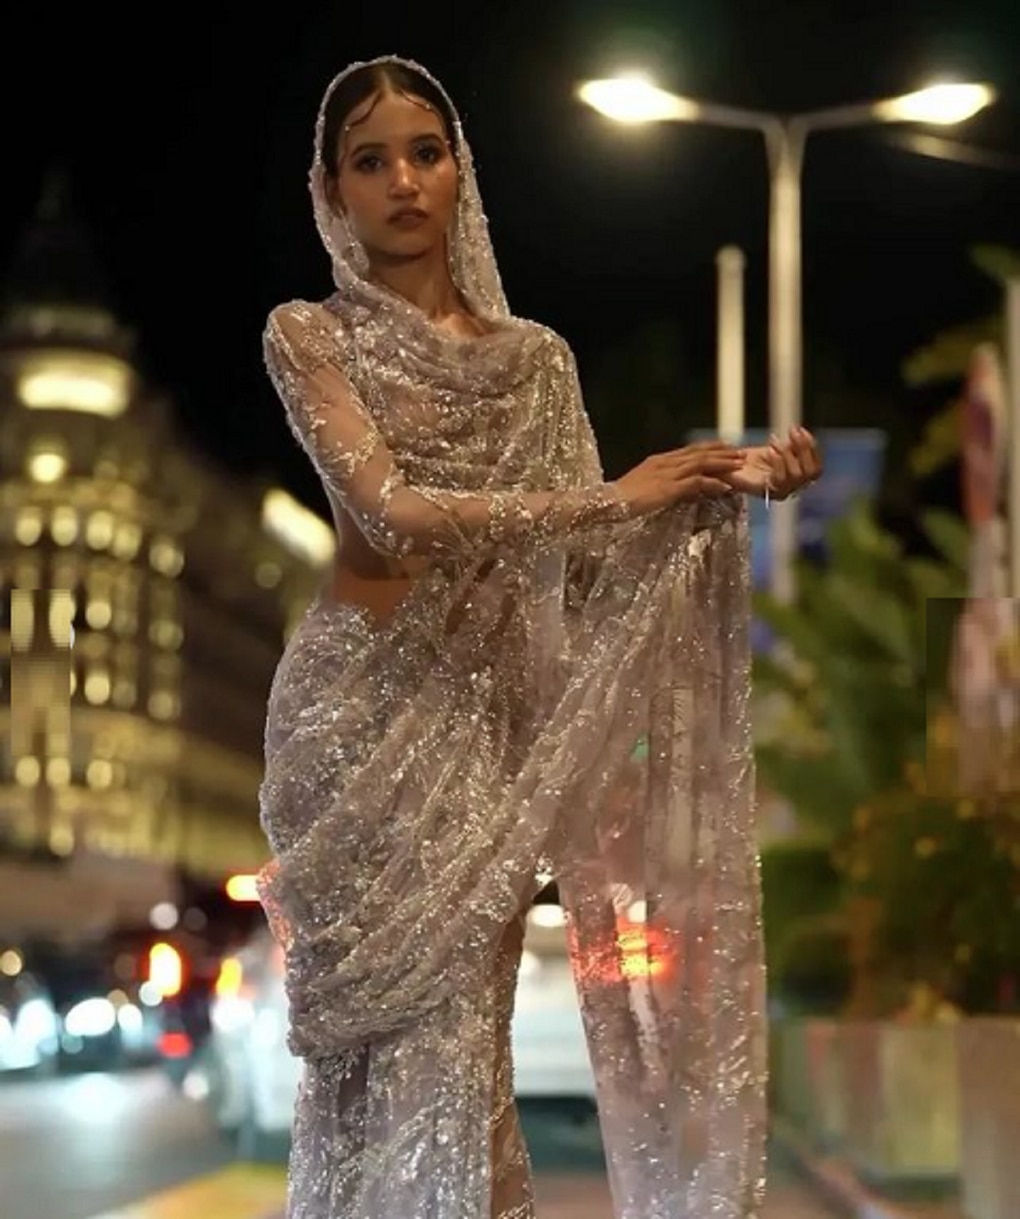 Nancy Tyagi again turns heads with self-made hand embroidery saree in second Cannes appearance